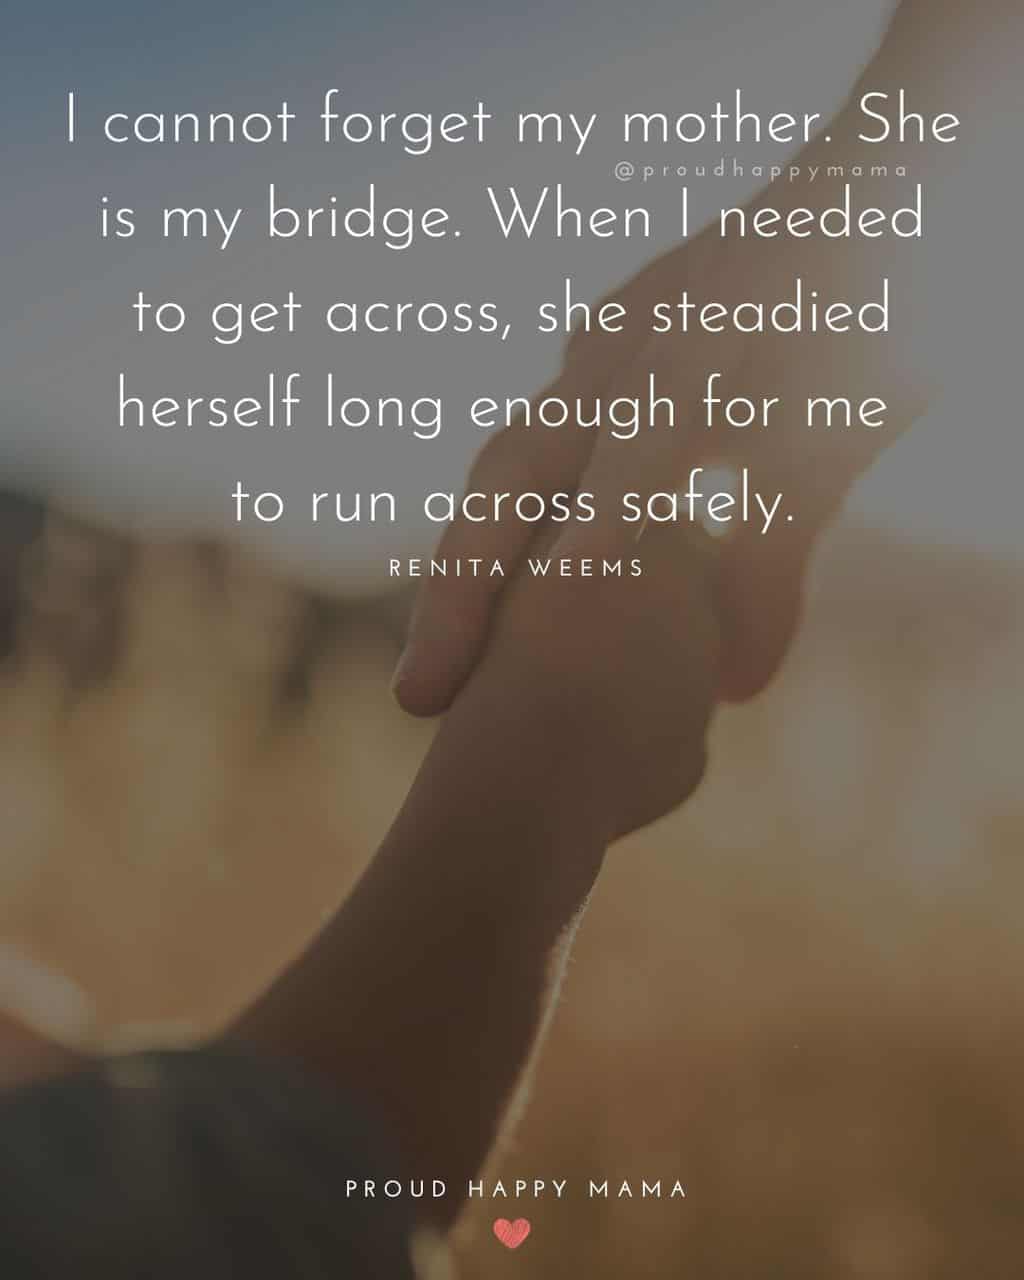 Mother letting go of young son's hand with text overlay, ‘I cannot forget my mother. She is my bridge. When I needed to get across, she steadied herself long enough for me to run across safely.’ ― Renita Weems